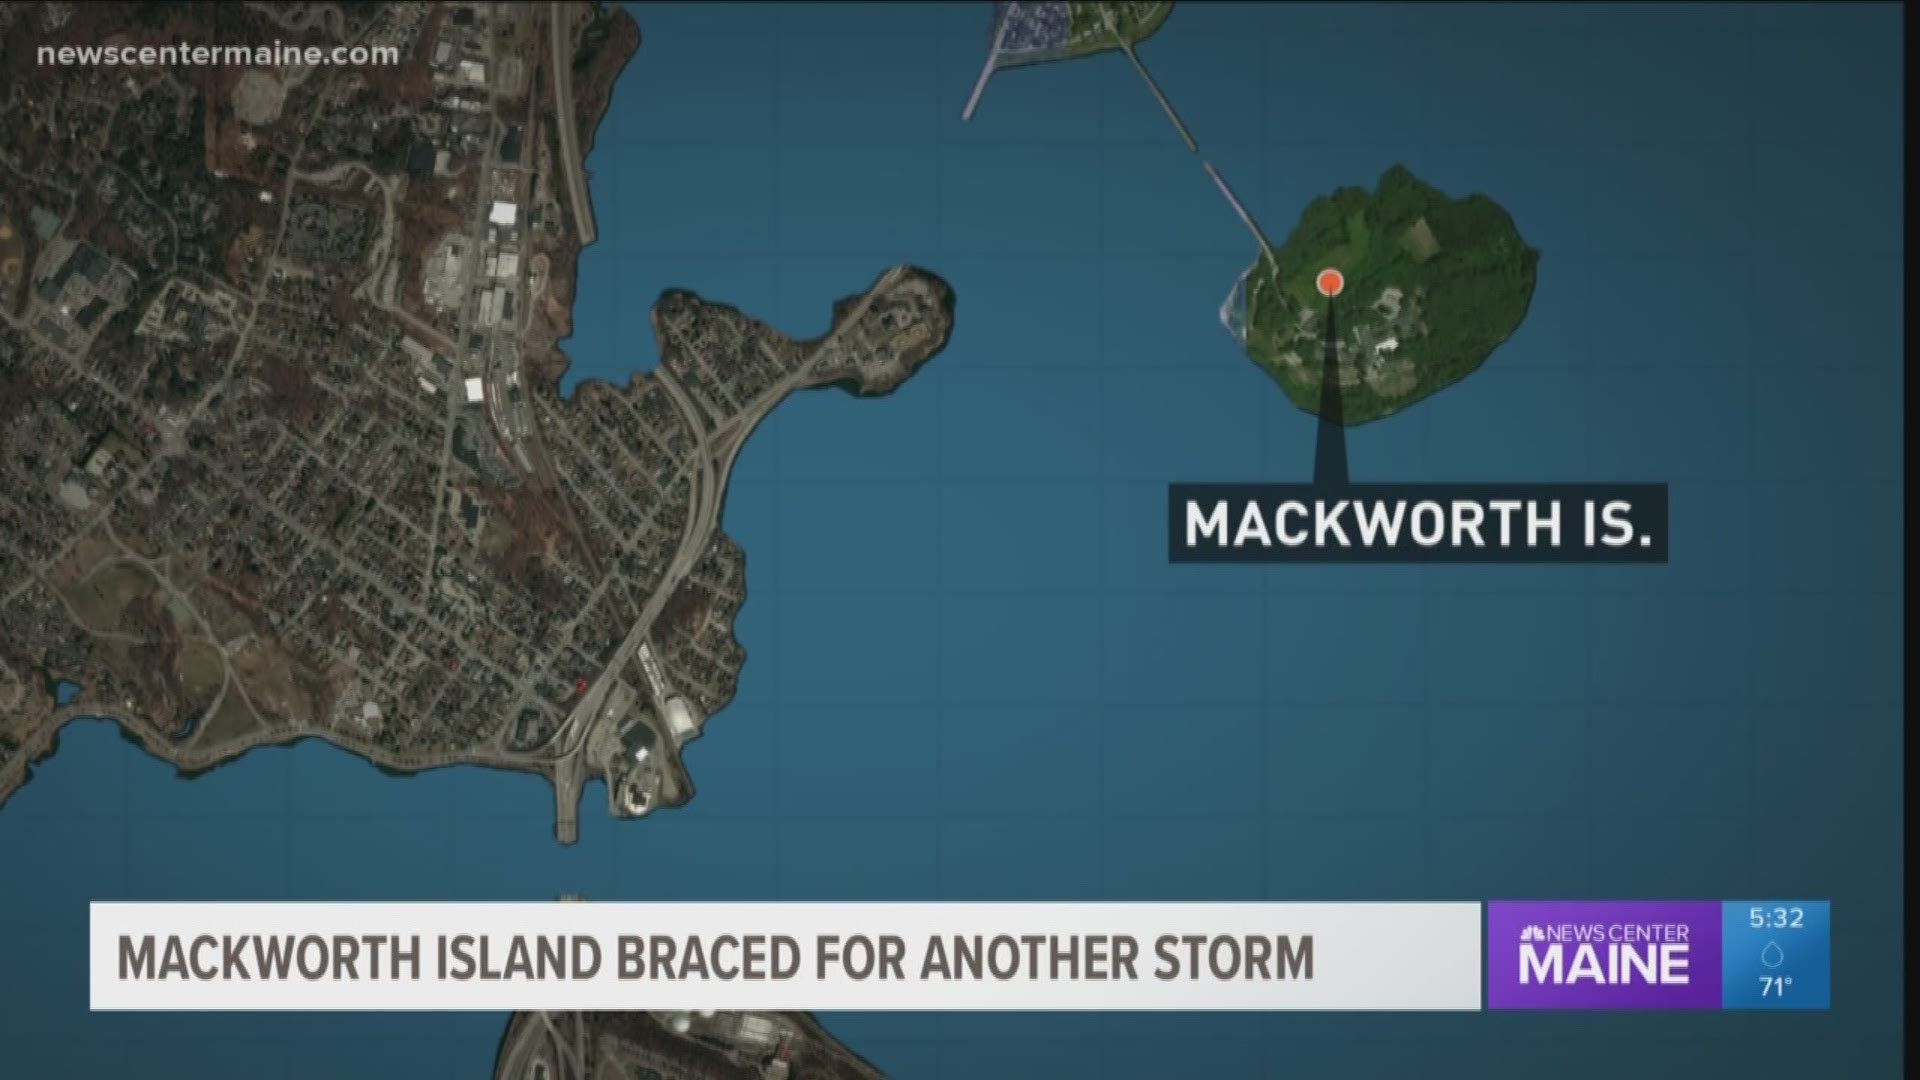 Mackworth Island braced for another storm